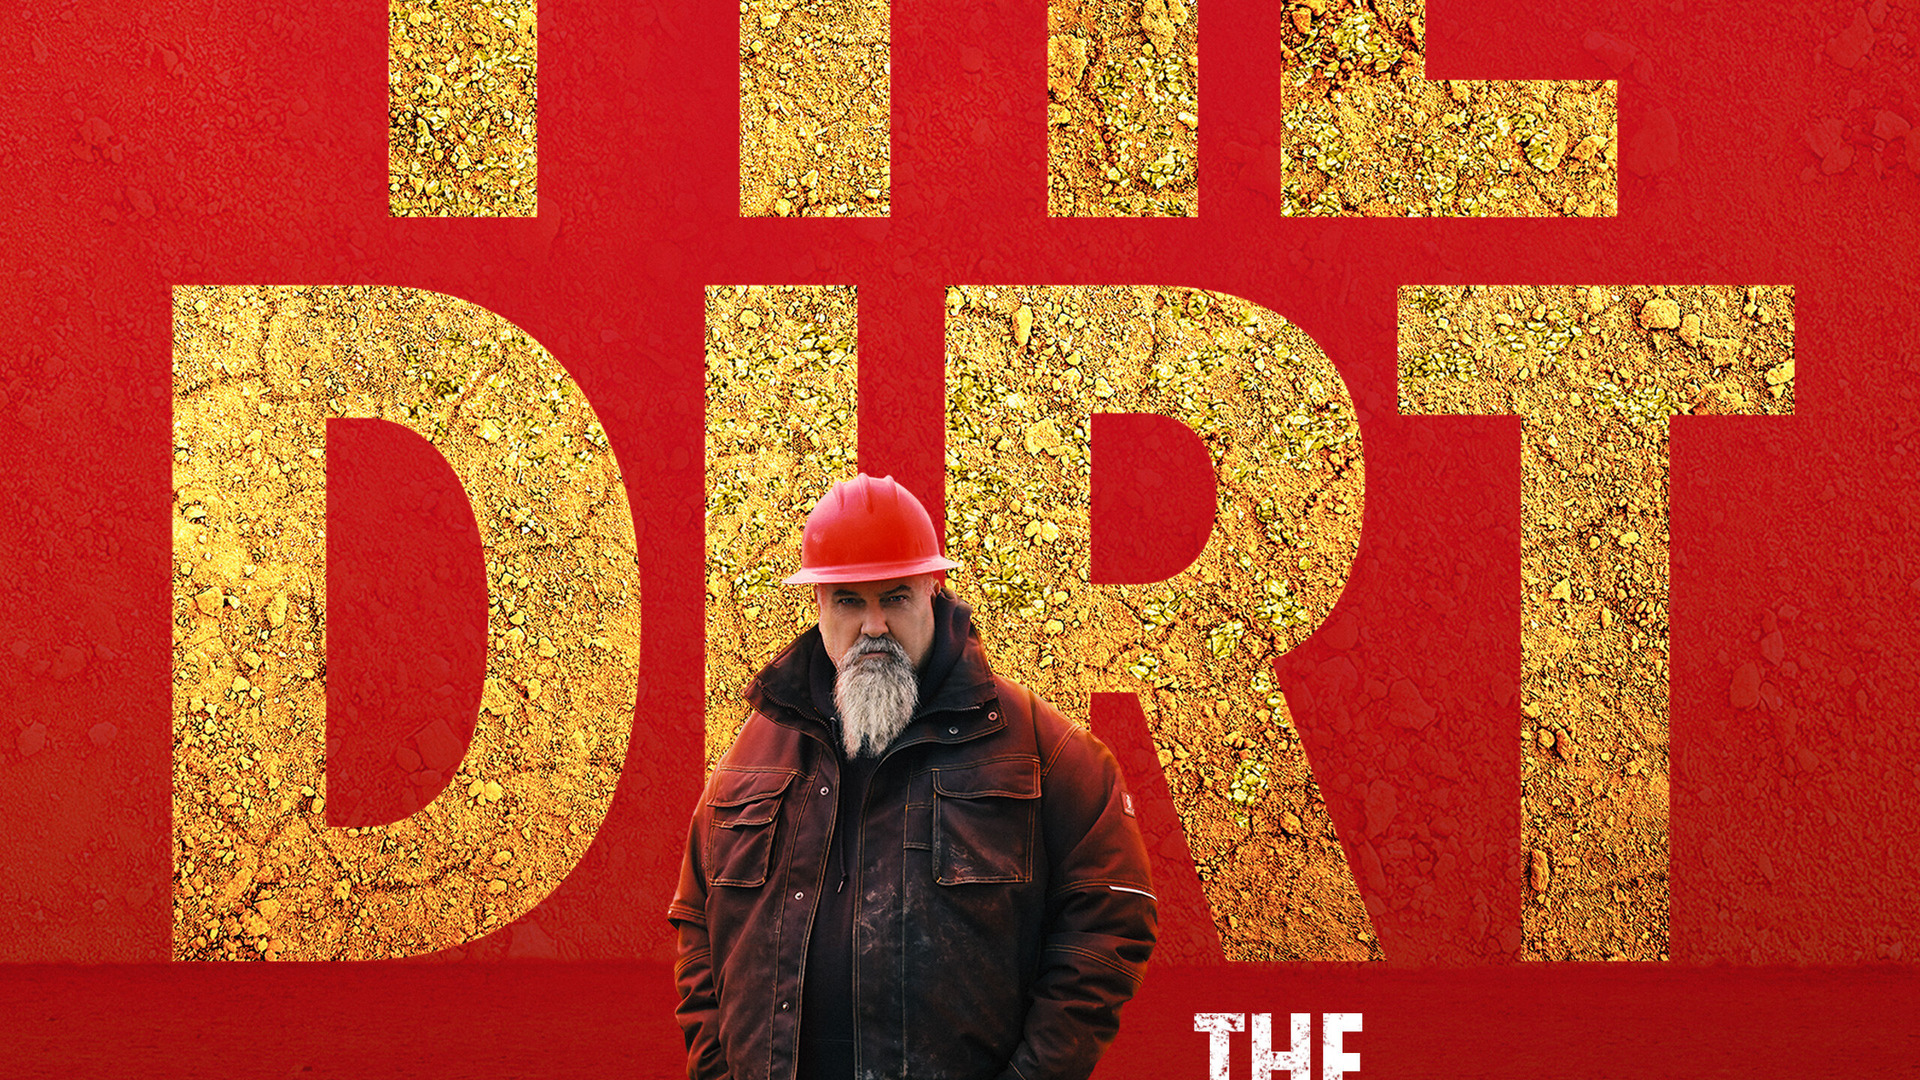 Show Gold Rush The Dirt: The Hoffman Story